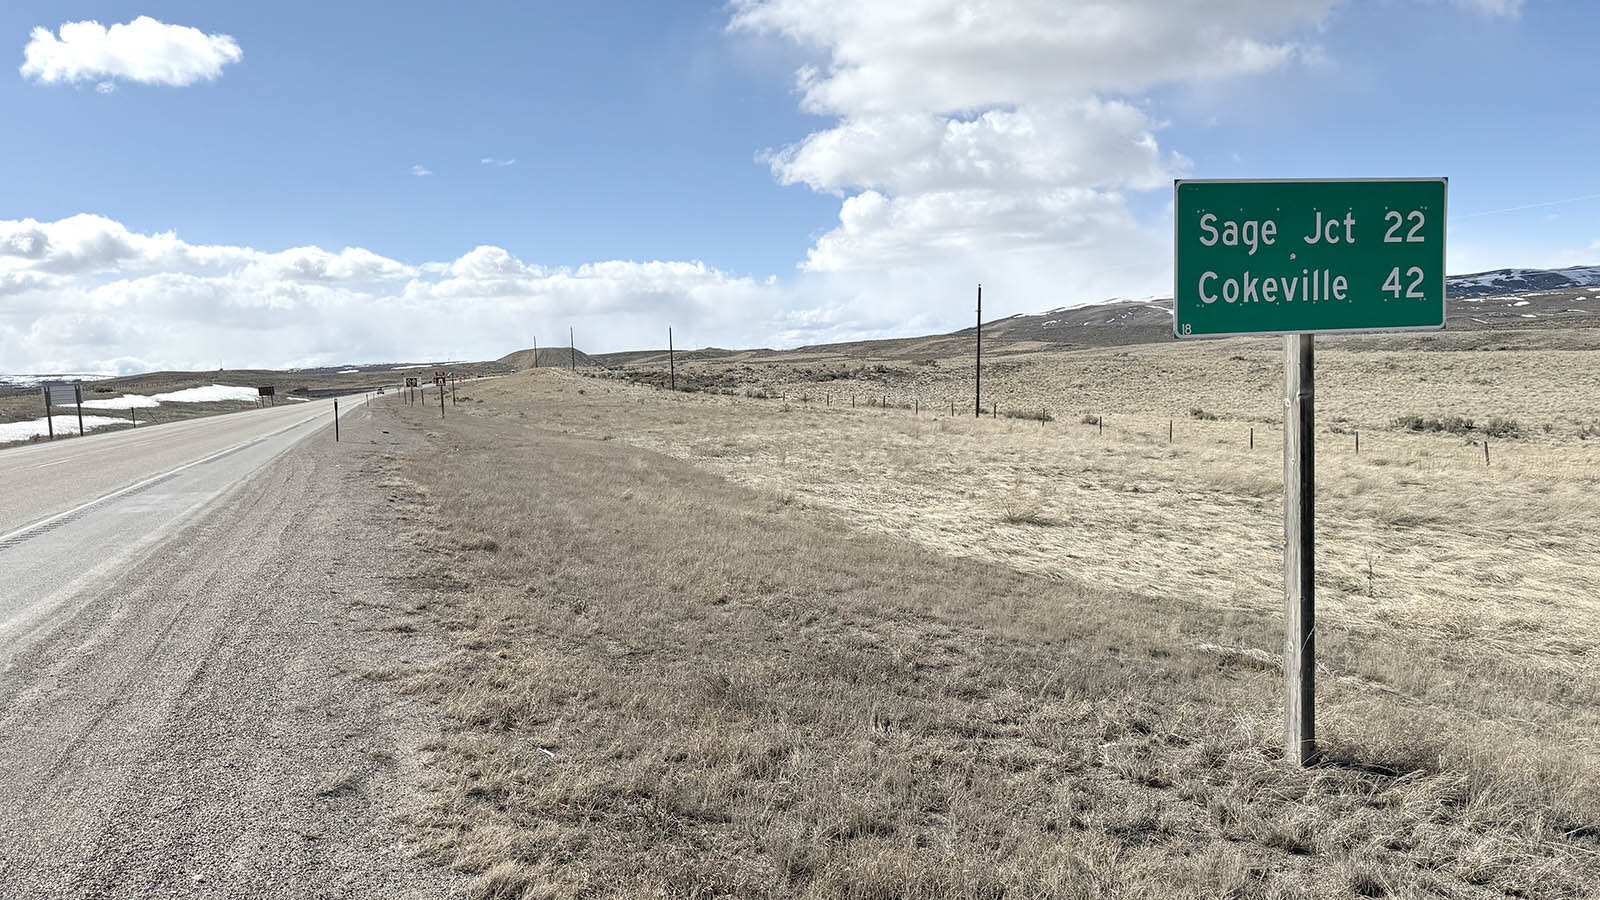 A 2.71-mile stretch of US Highway 30 near the Kemmerer port of entry will be realigned to the north so that a coal mine operator can access coal reserves. A Union Pacific railroad runs under the road just past the mile marker sign, with the Naughton coal-fired power plant located to the south.